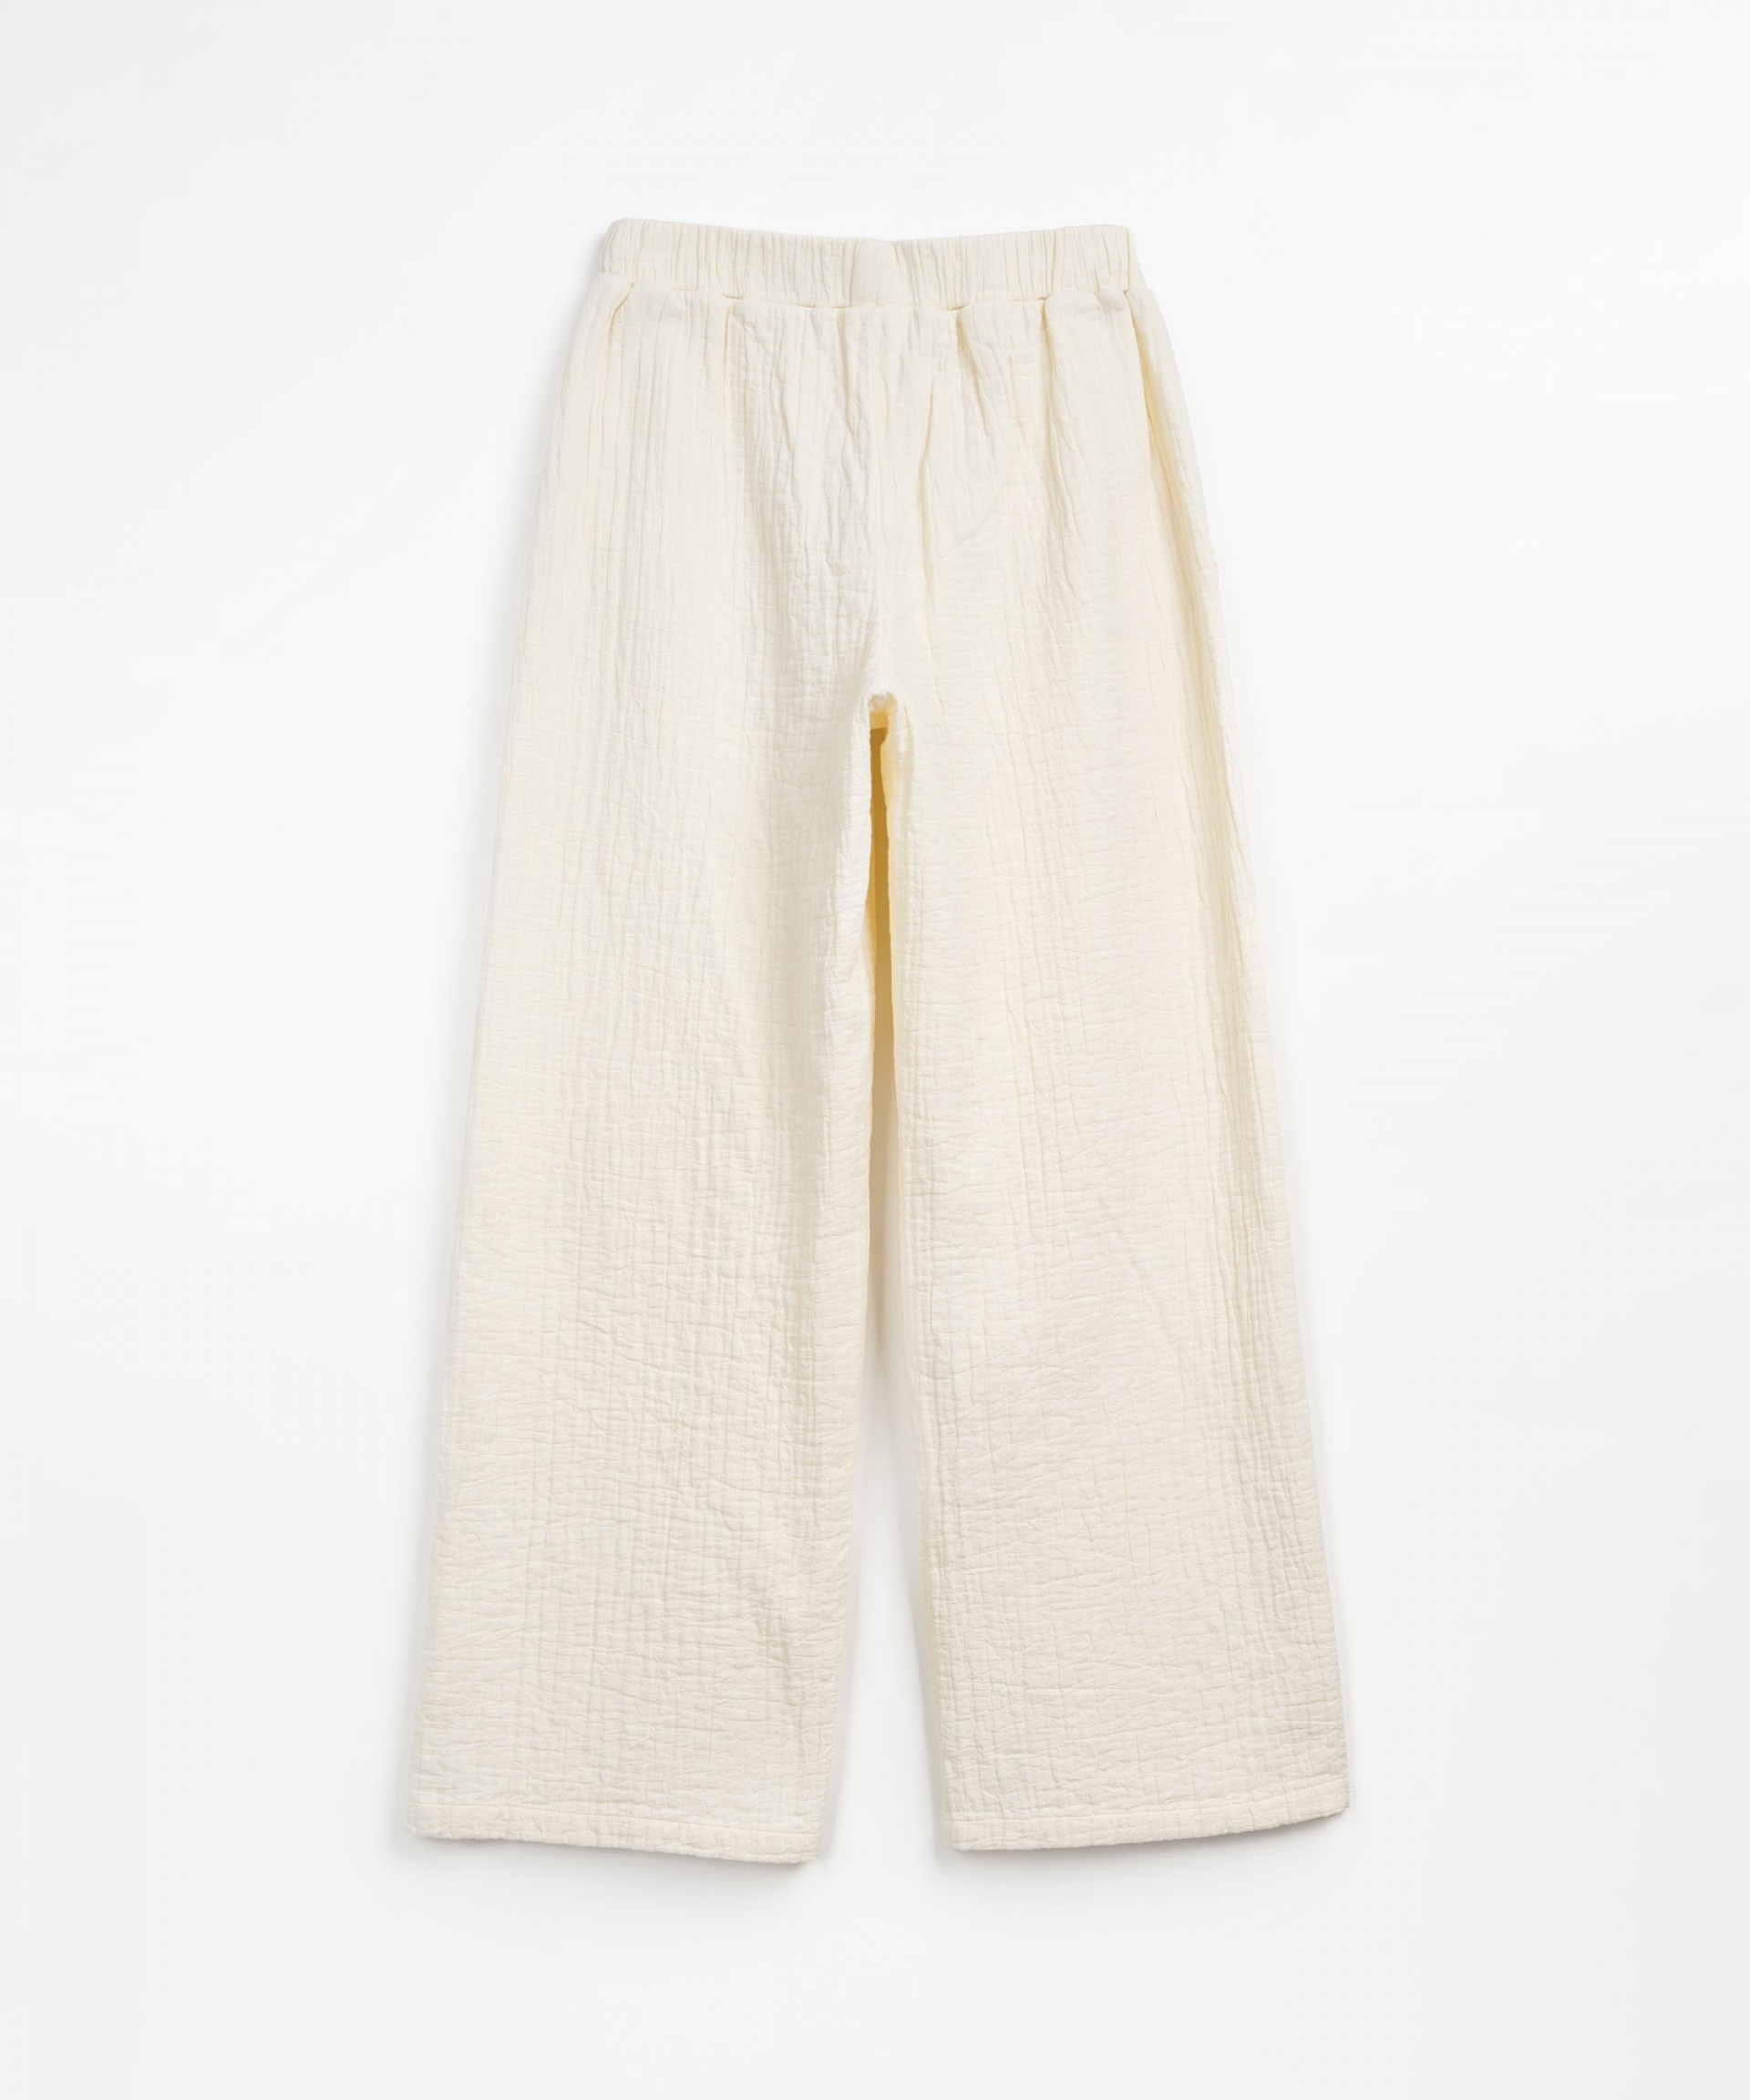 Cotton trousers with front pockets | Textile Art